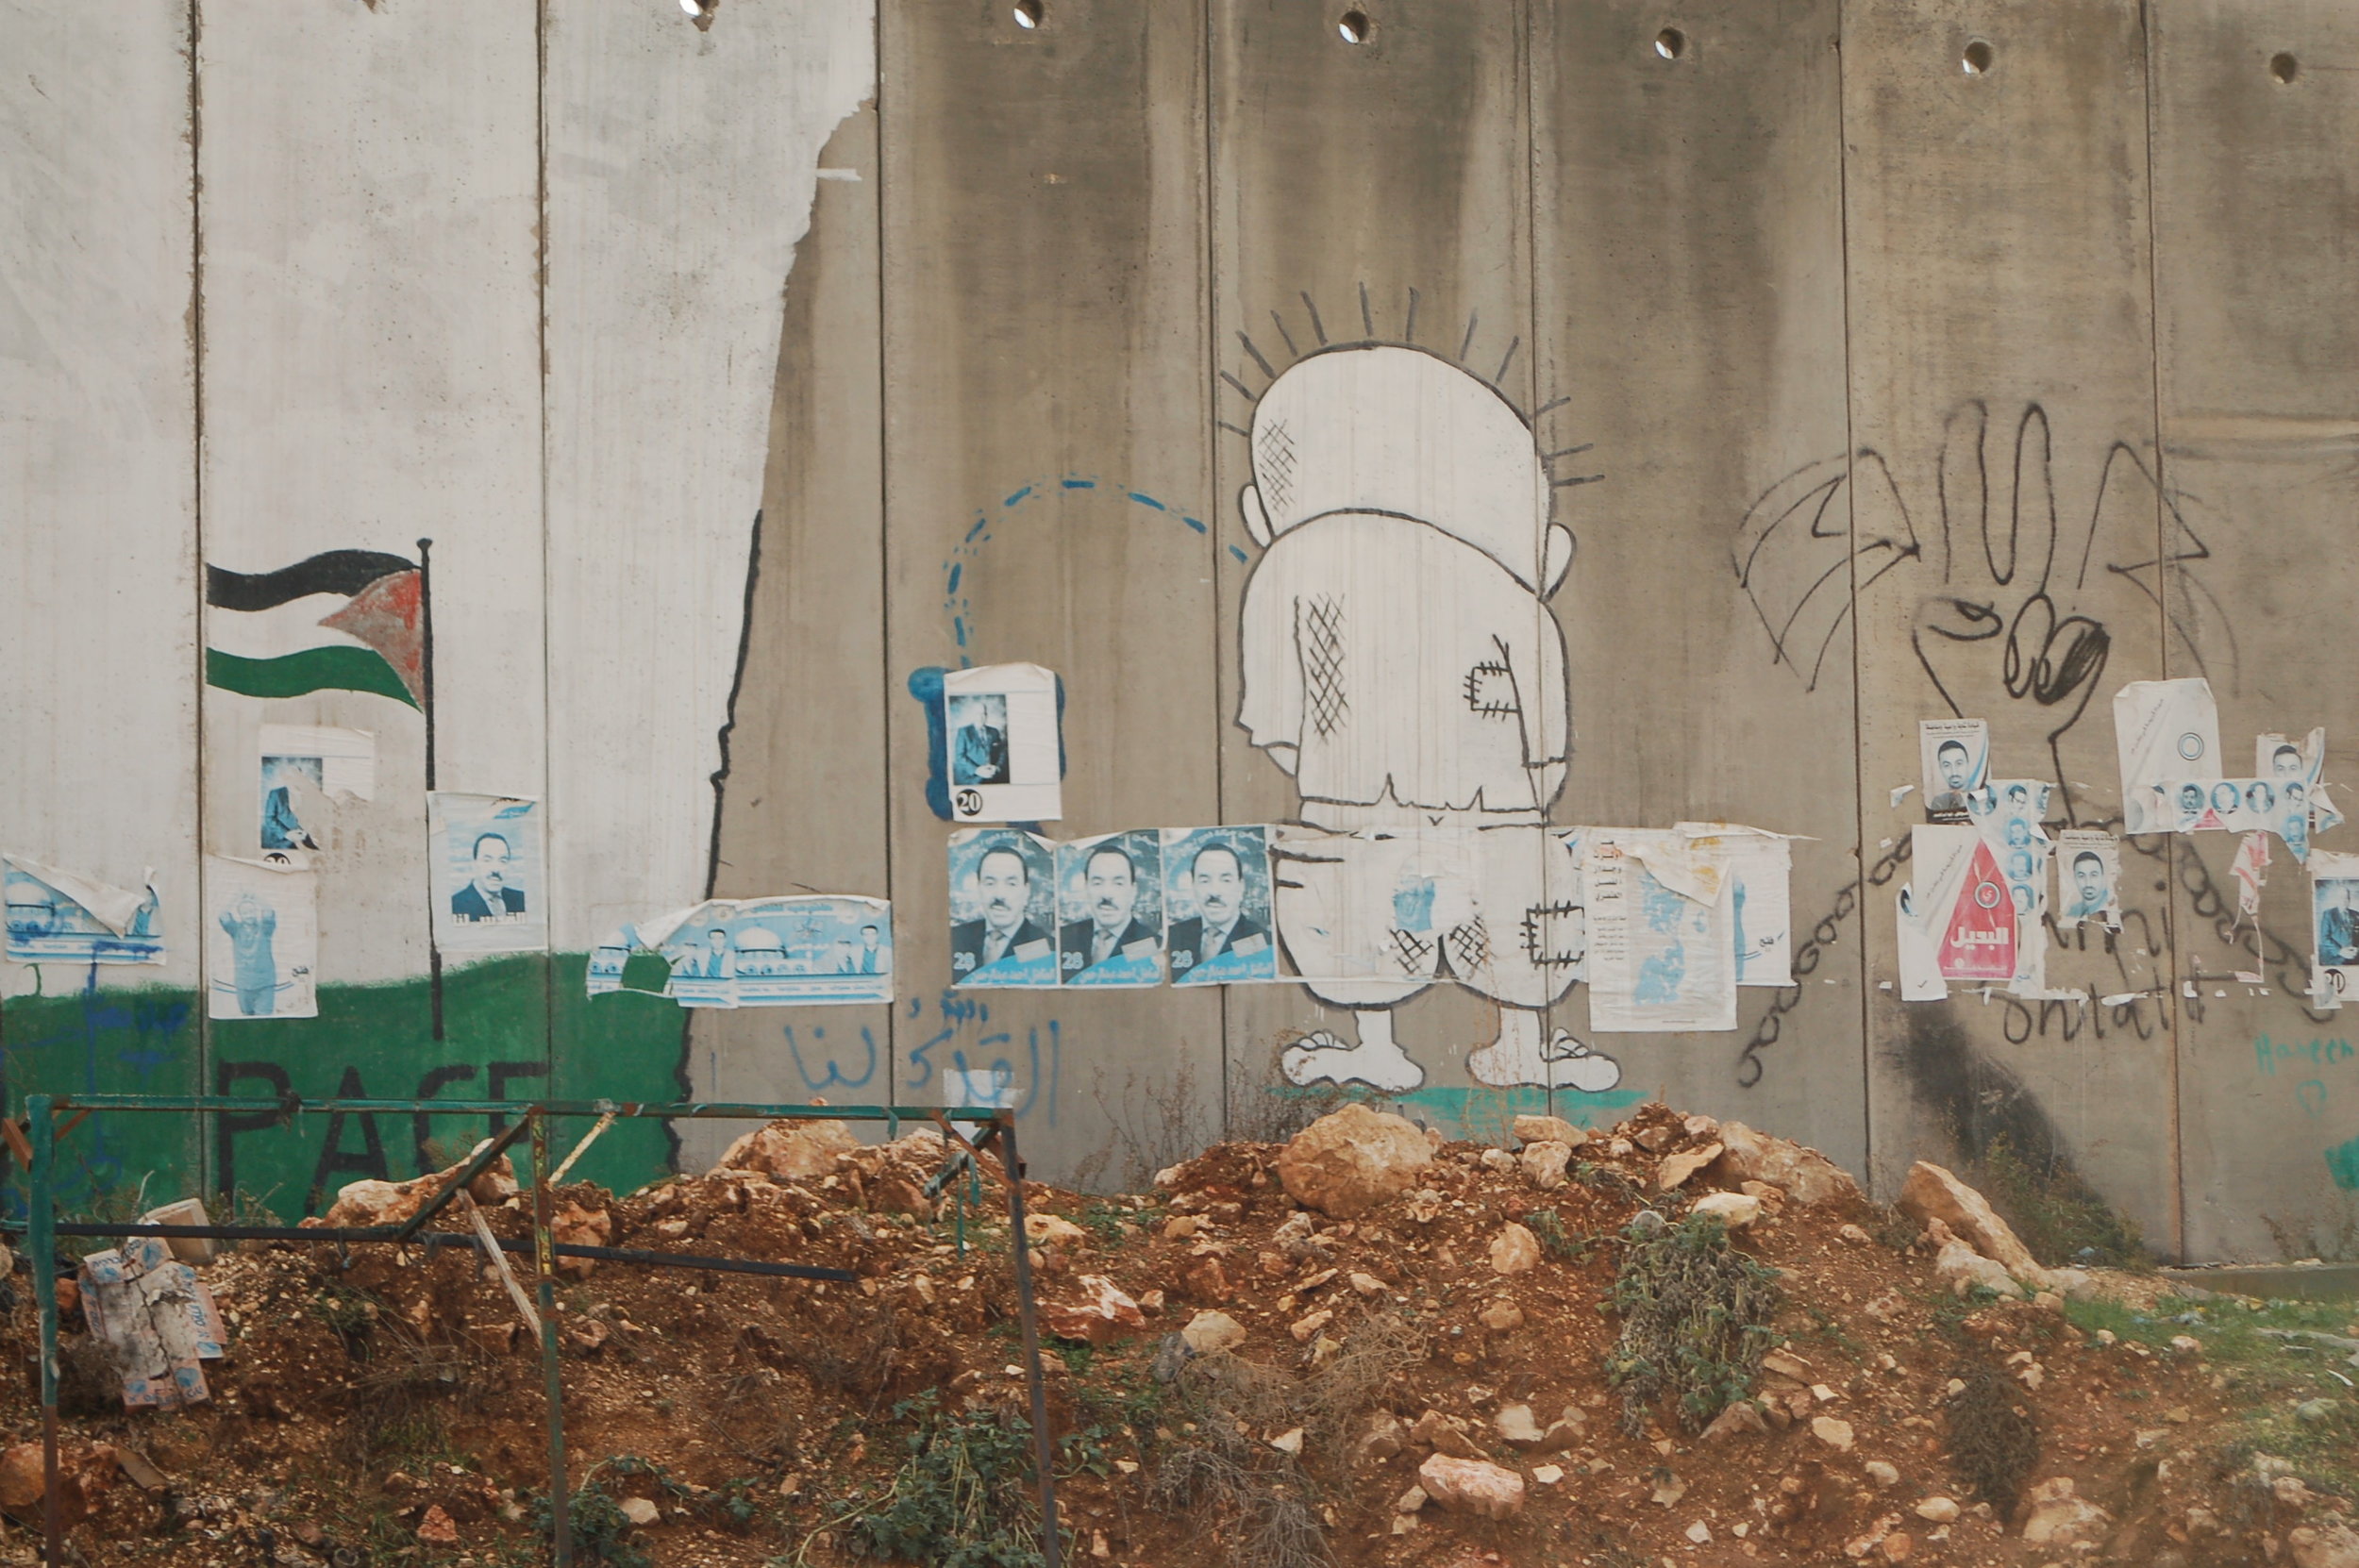 West Bank Wall